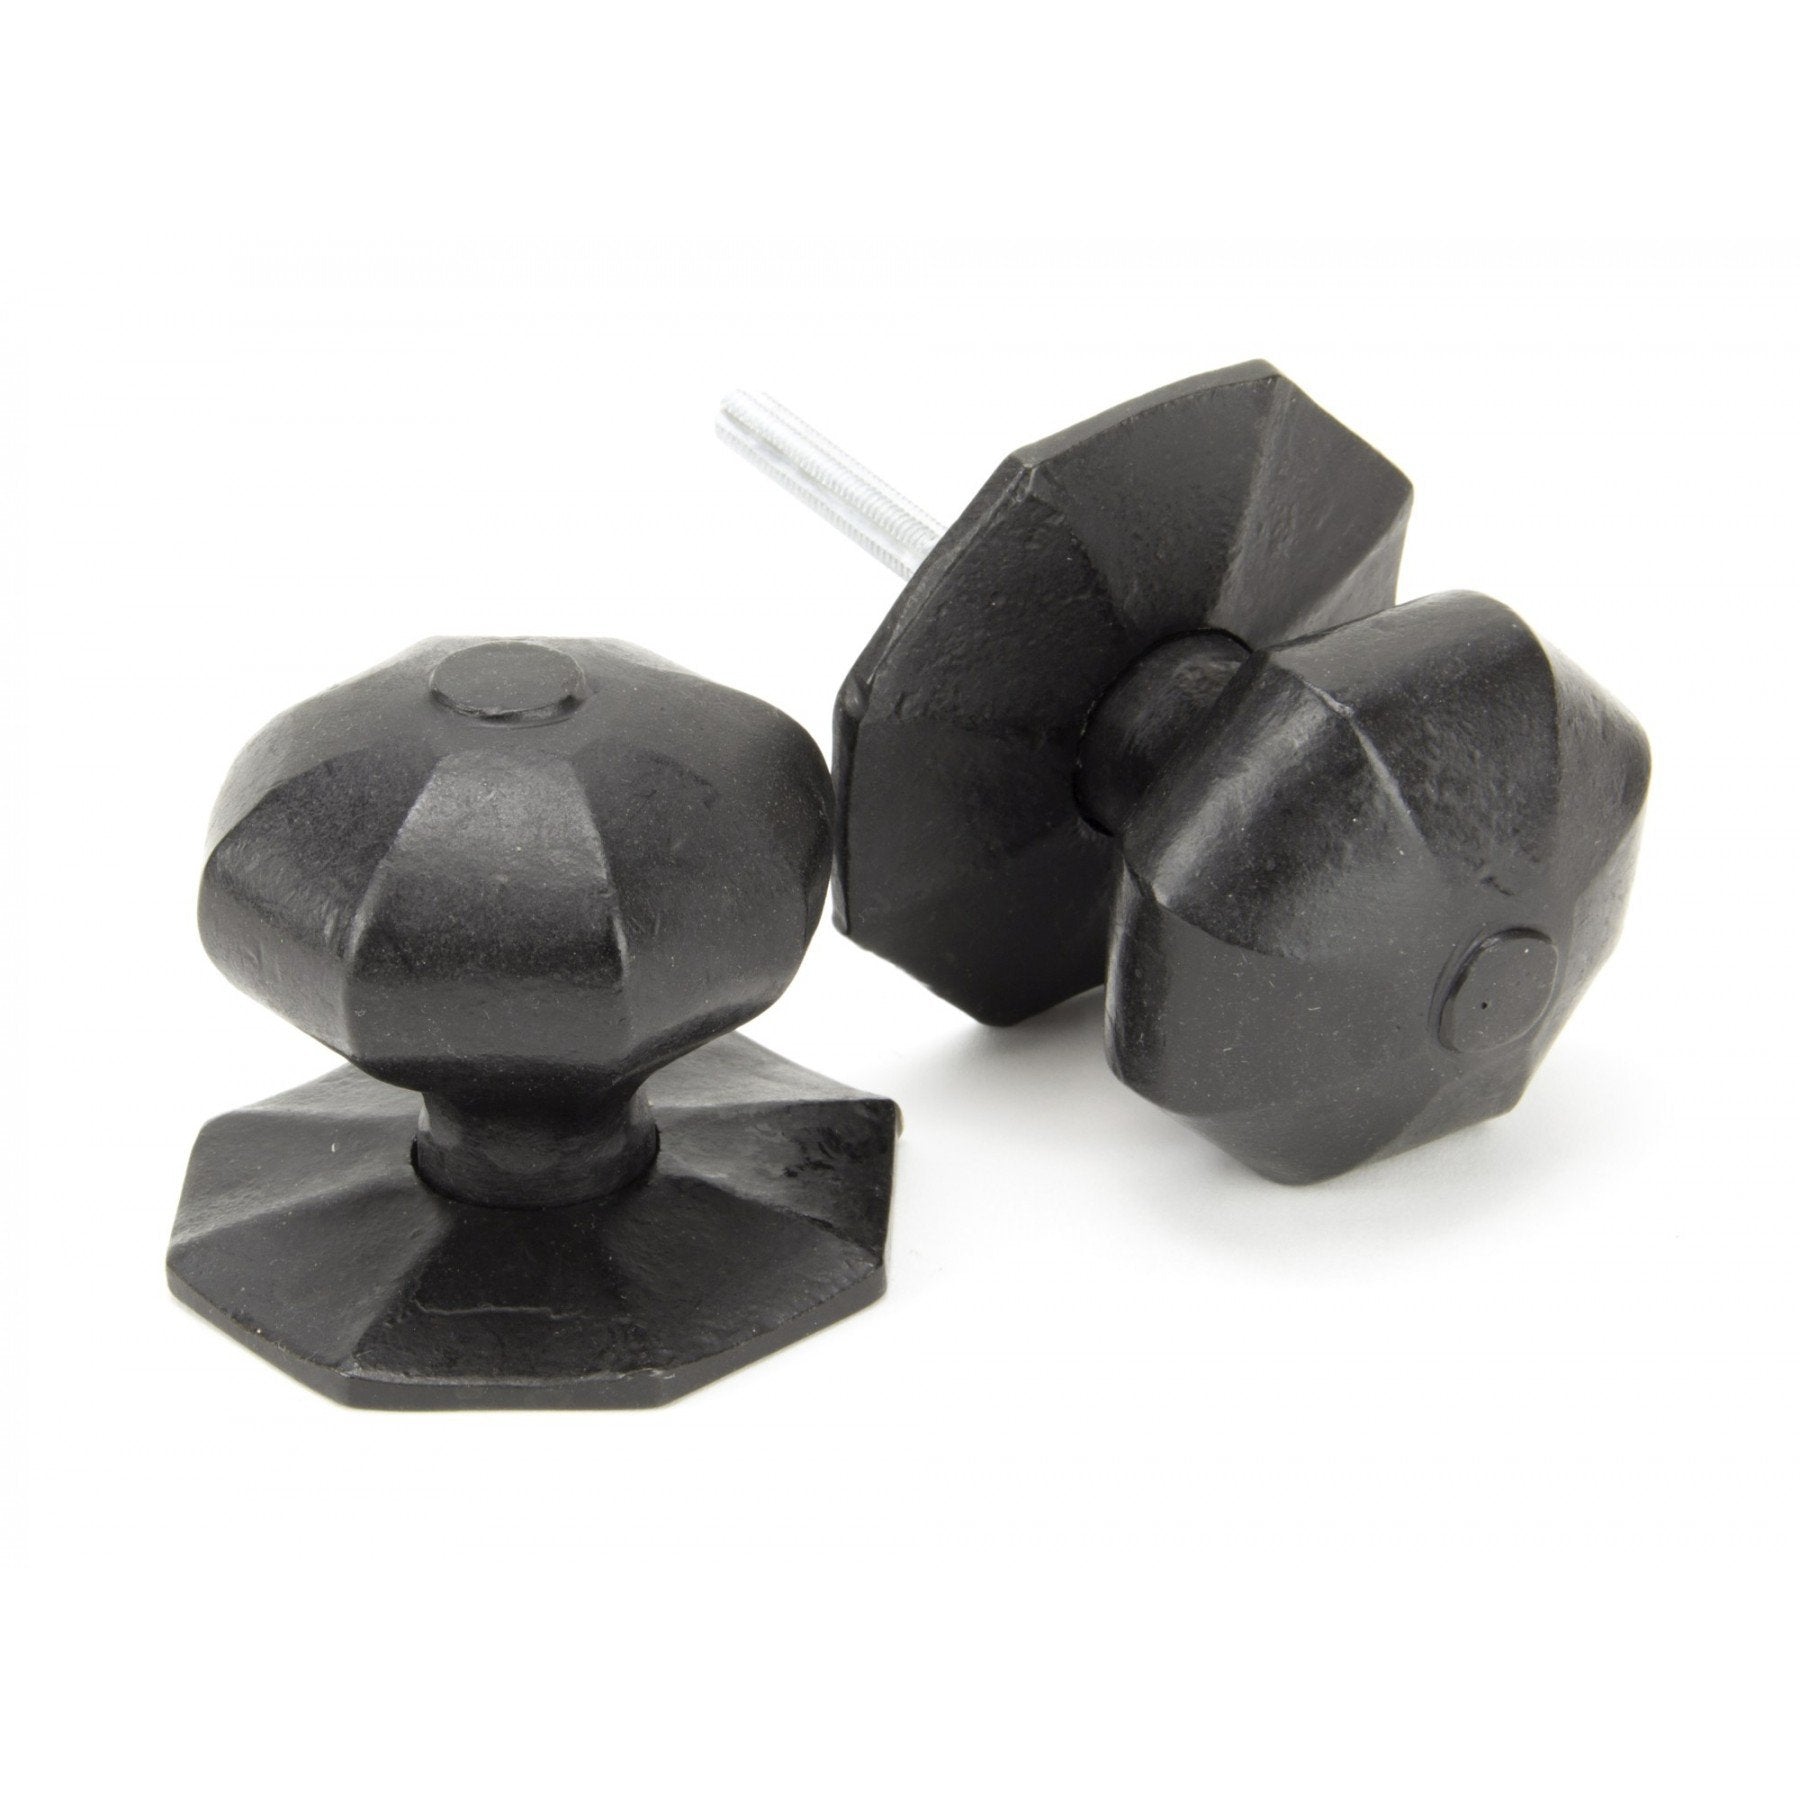 From the Anvil External Beeswax Octagonal Mortice/Rim Knob Set - Large - No.42 Interiors